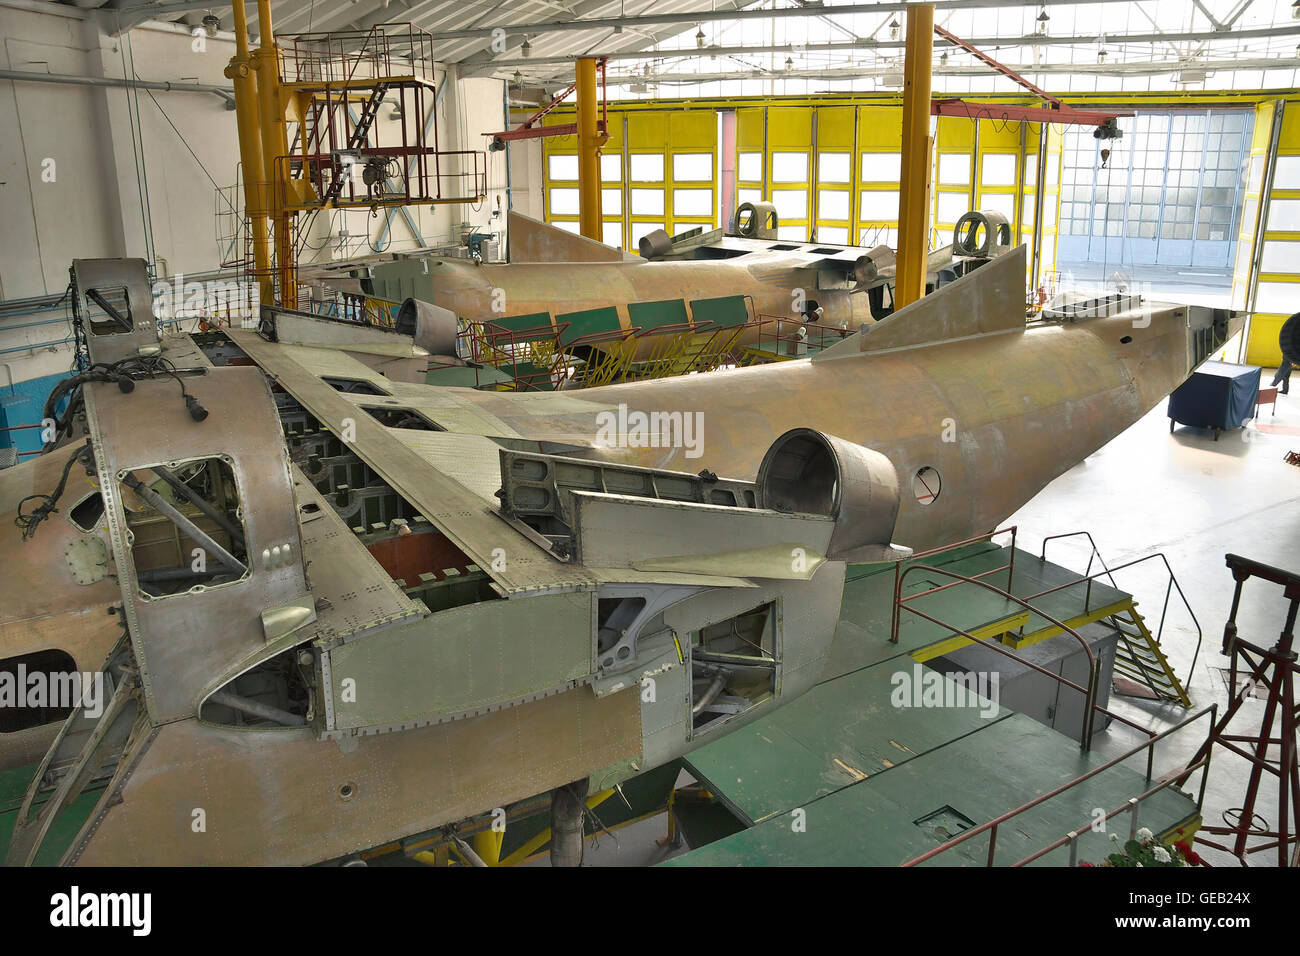 Kiev, Ukraine - July 7, 2012: Planes being assembled in hangar after a serious check and equipment upgrade Stock Photo